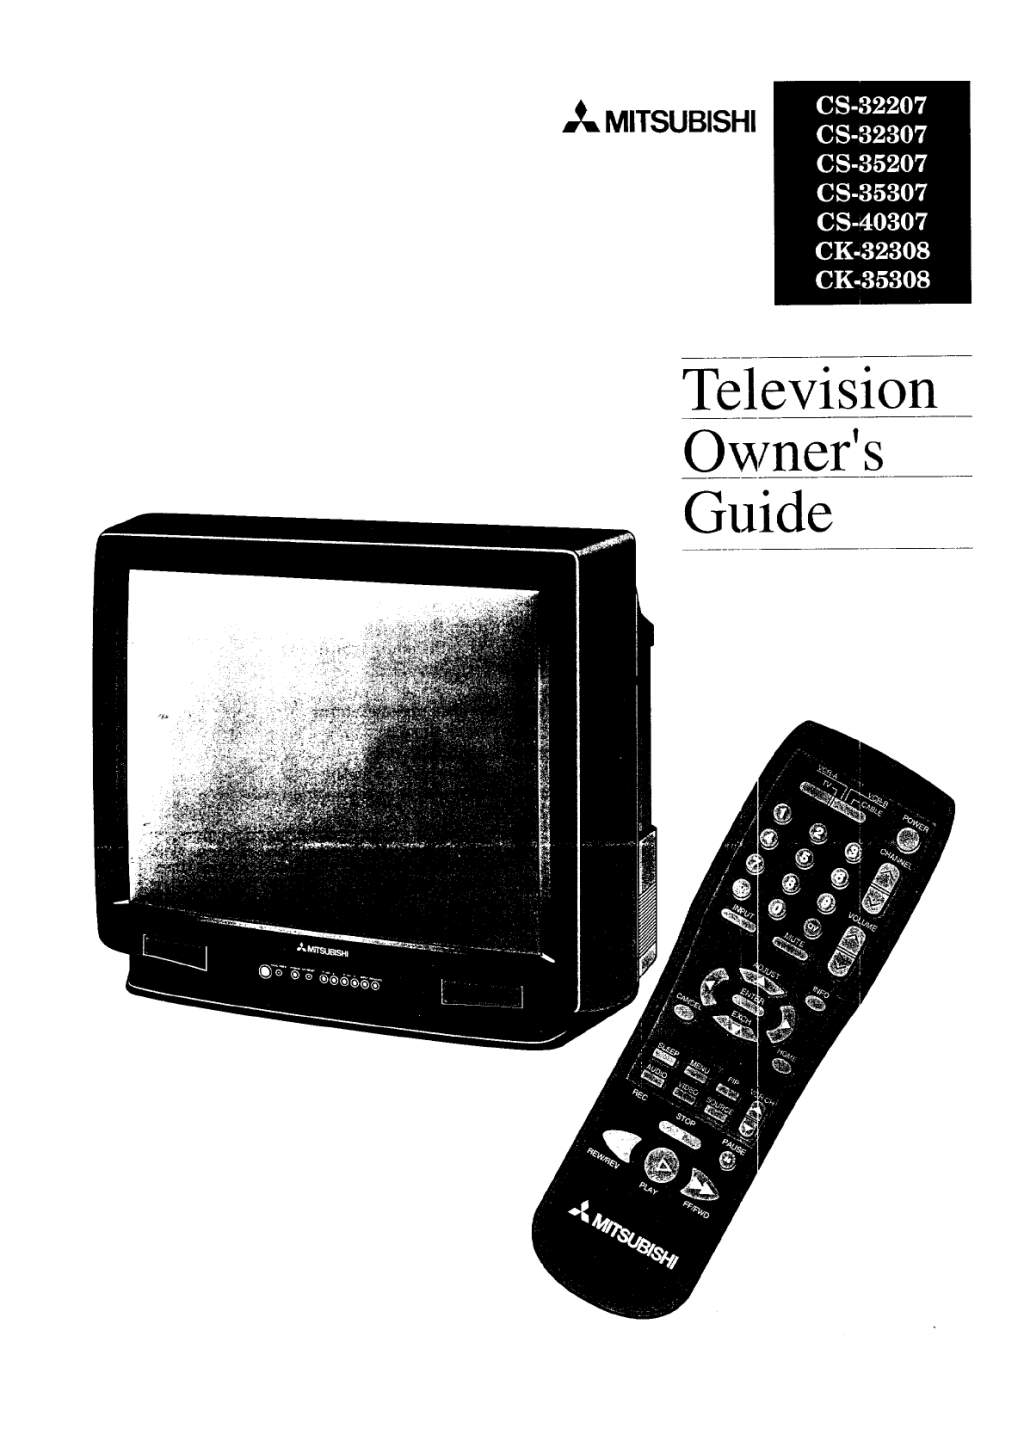 Picture of: Mitsubishi Electronics CRT Television CS- User Guide